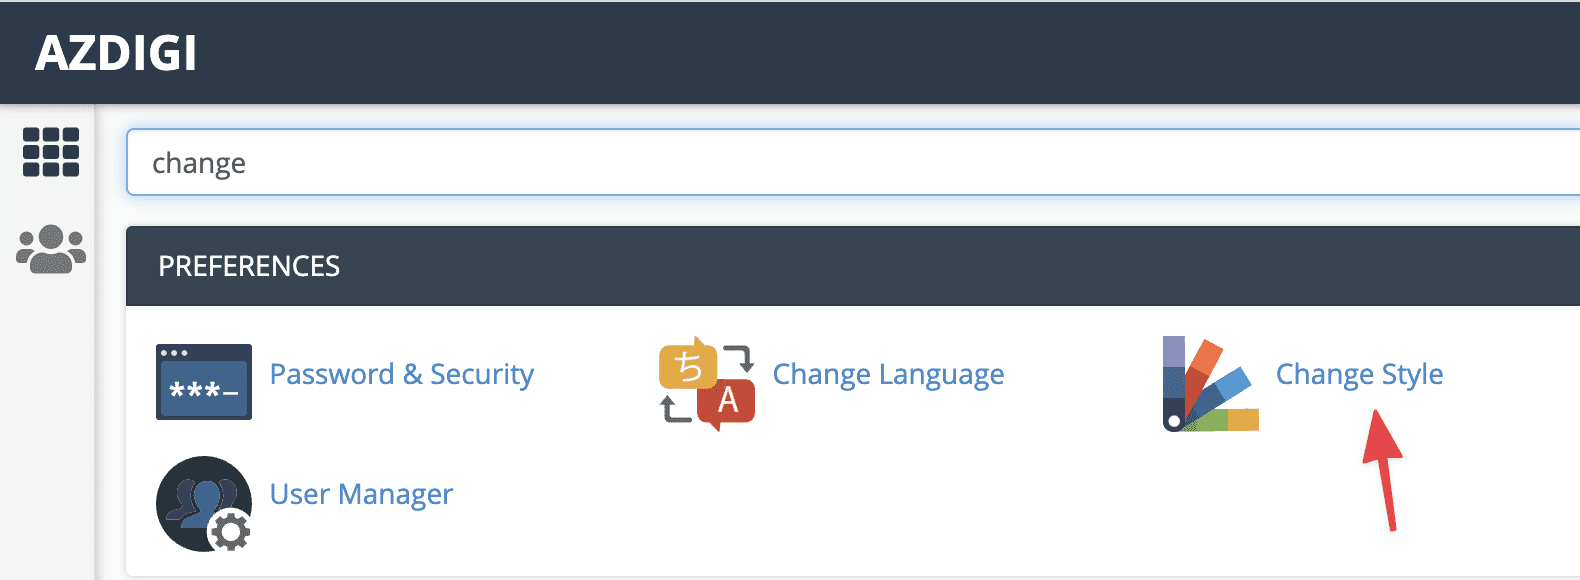 Change cPanel's Language and Style